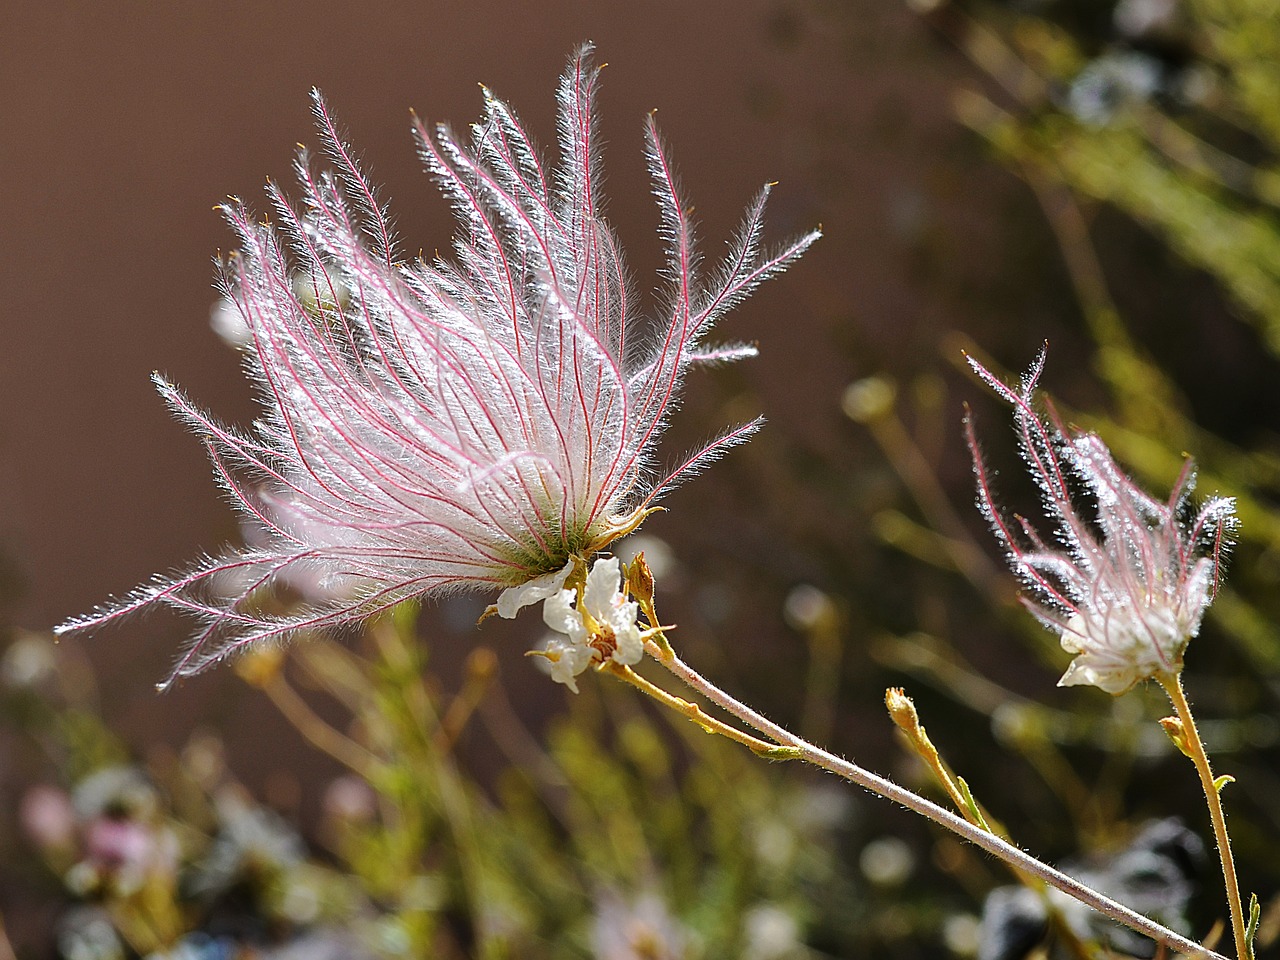 Image of the flower from a desert shrub, Apache Plume provides an example of a desert riparian plant that can be revegetated using hydrogels.